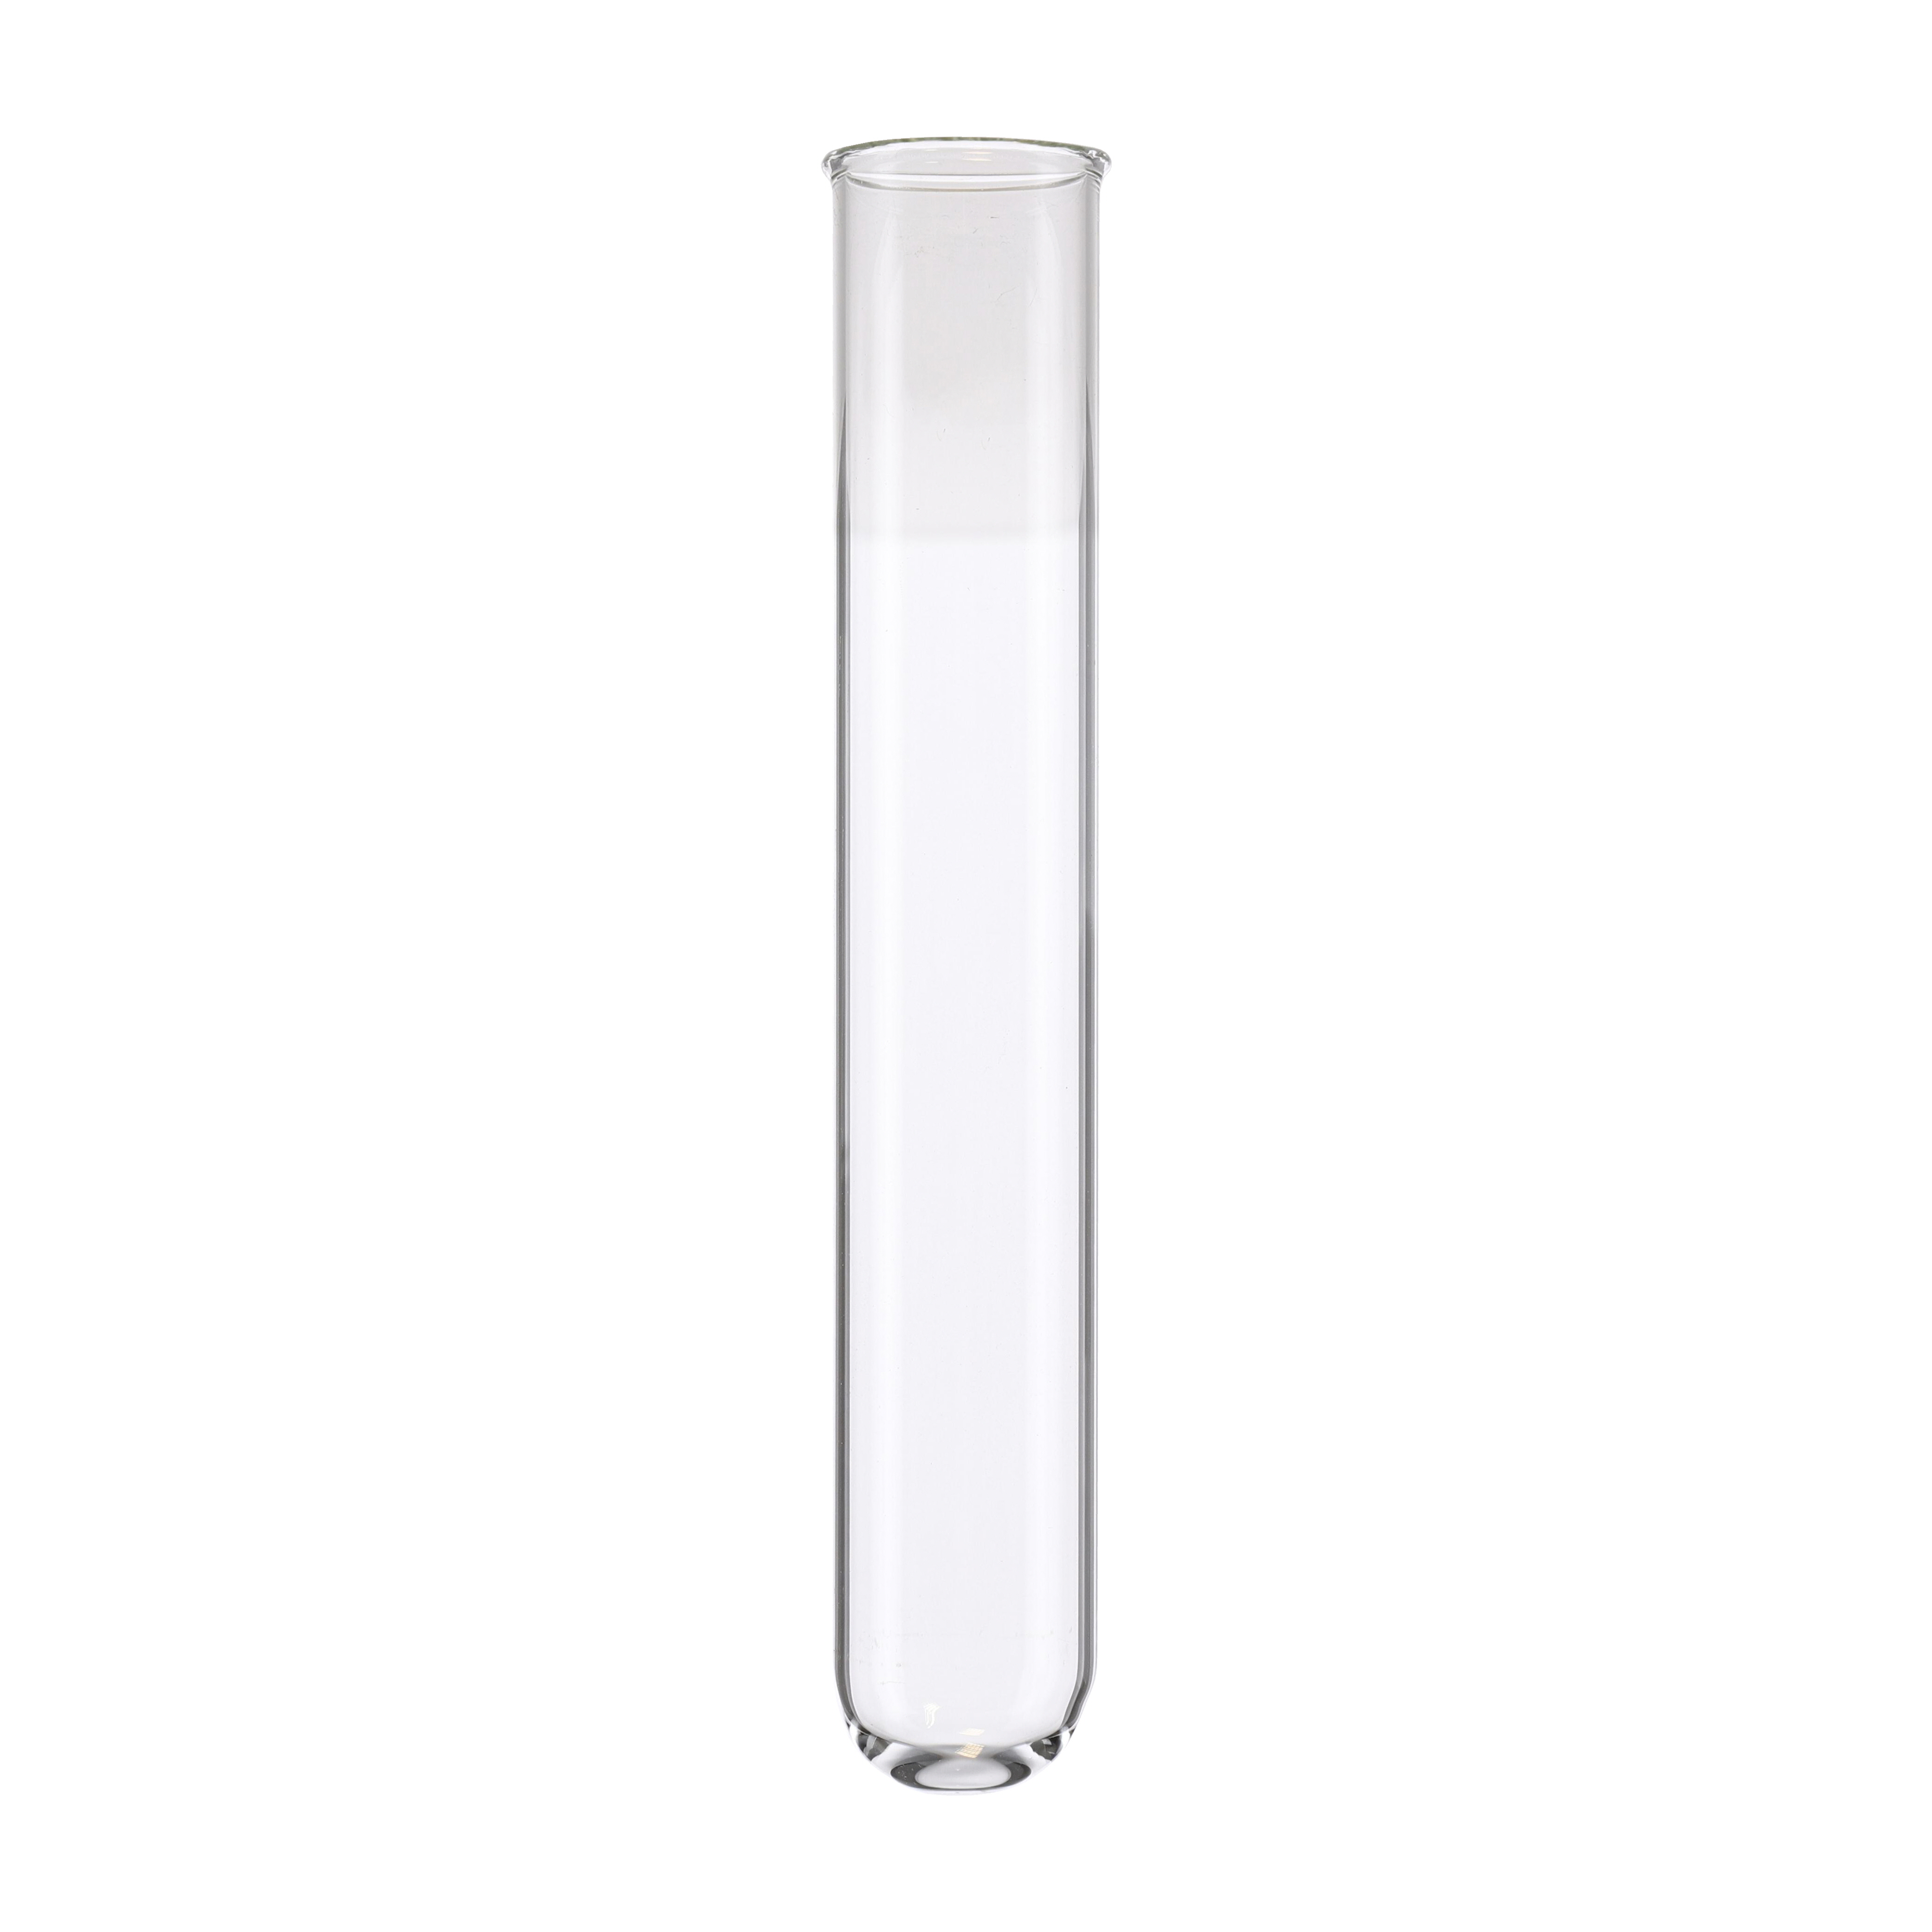 Pack of 24 Eisco Labs Rimmed Borosilicate Glass Test Tube 20 x 150mm 5.90 Height 